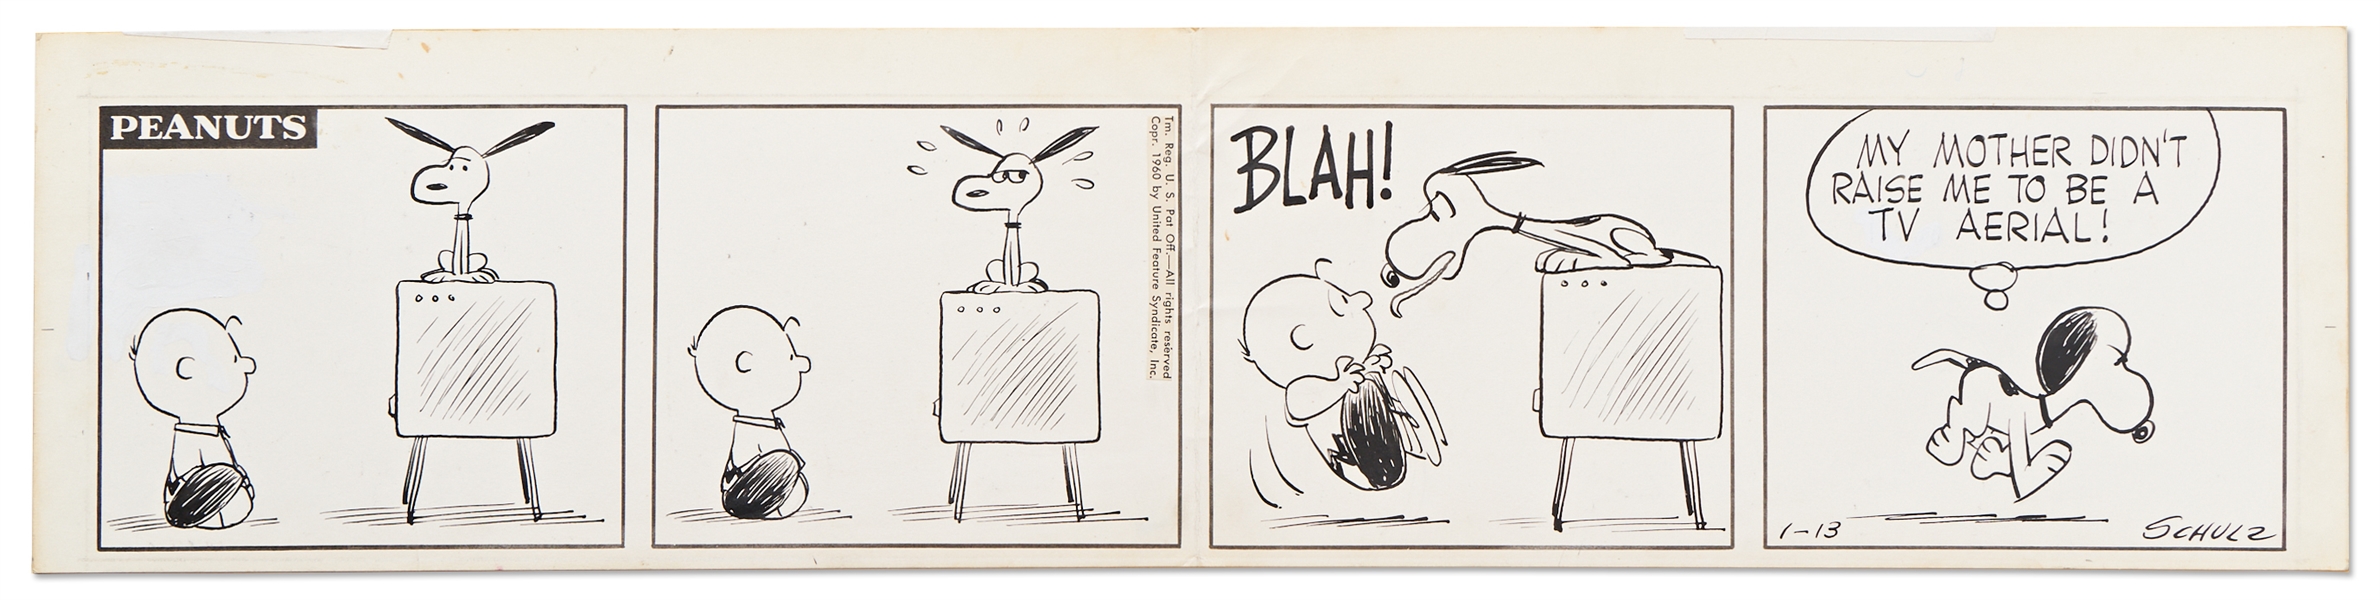 Charles Schulz Original Hand-Drawn Peanuts Comic Strip from 1960 Where Snoopy Walks on Four Legs -- Snoopy Resents His Ears Being Used as TV Antennae